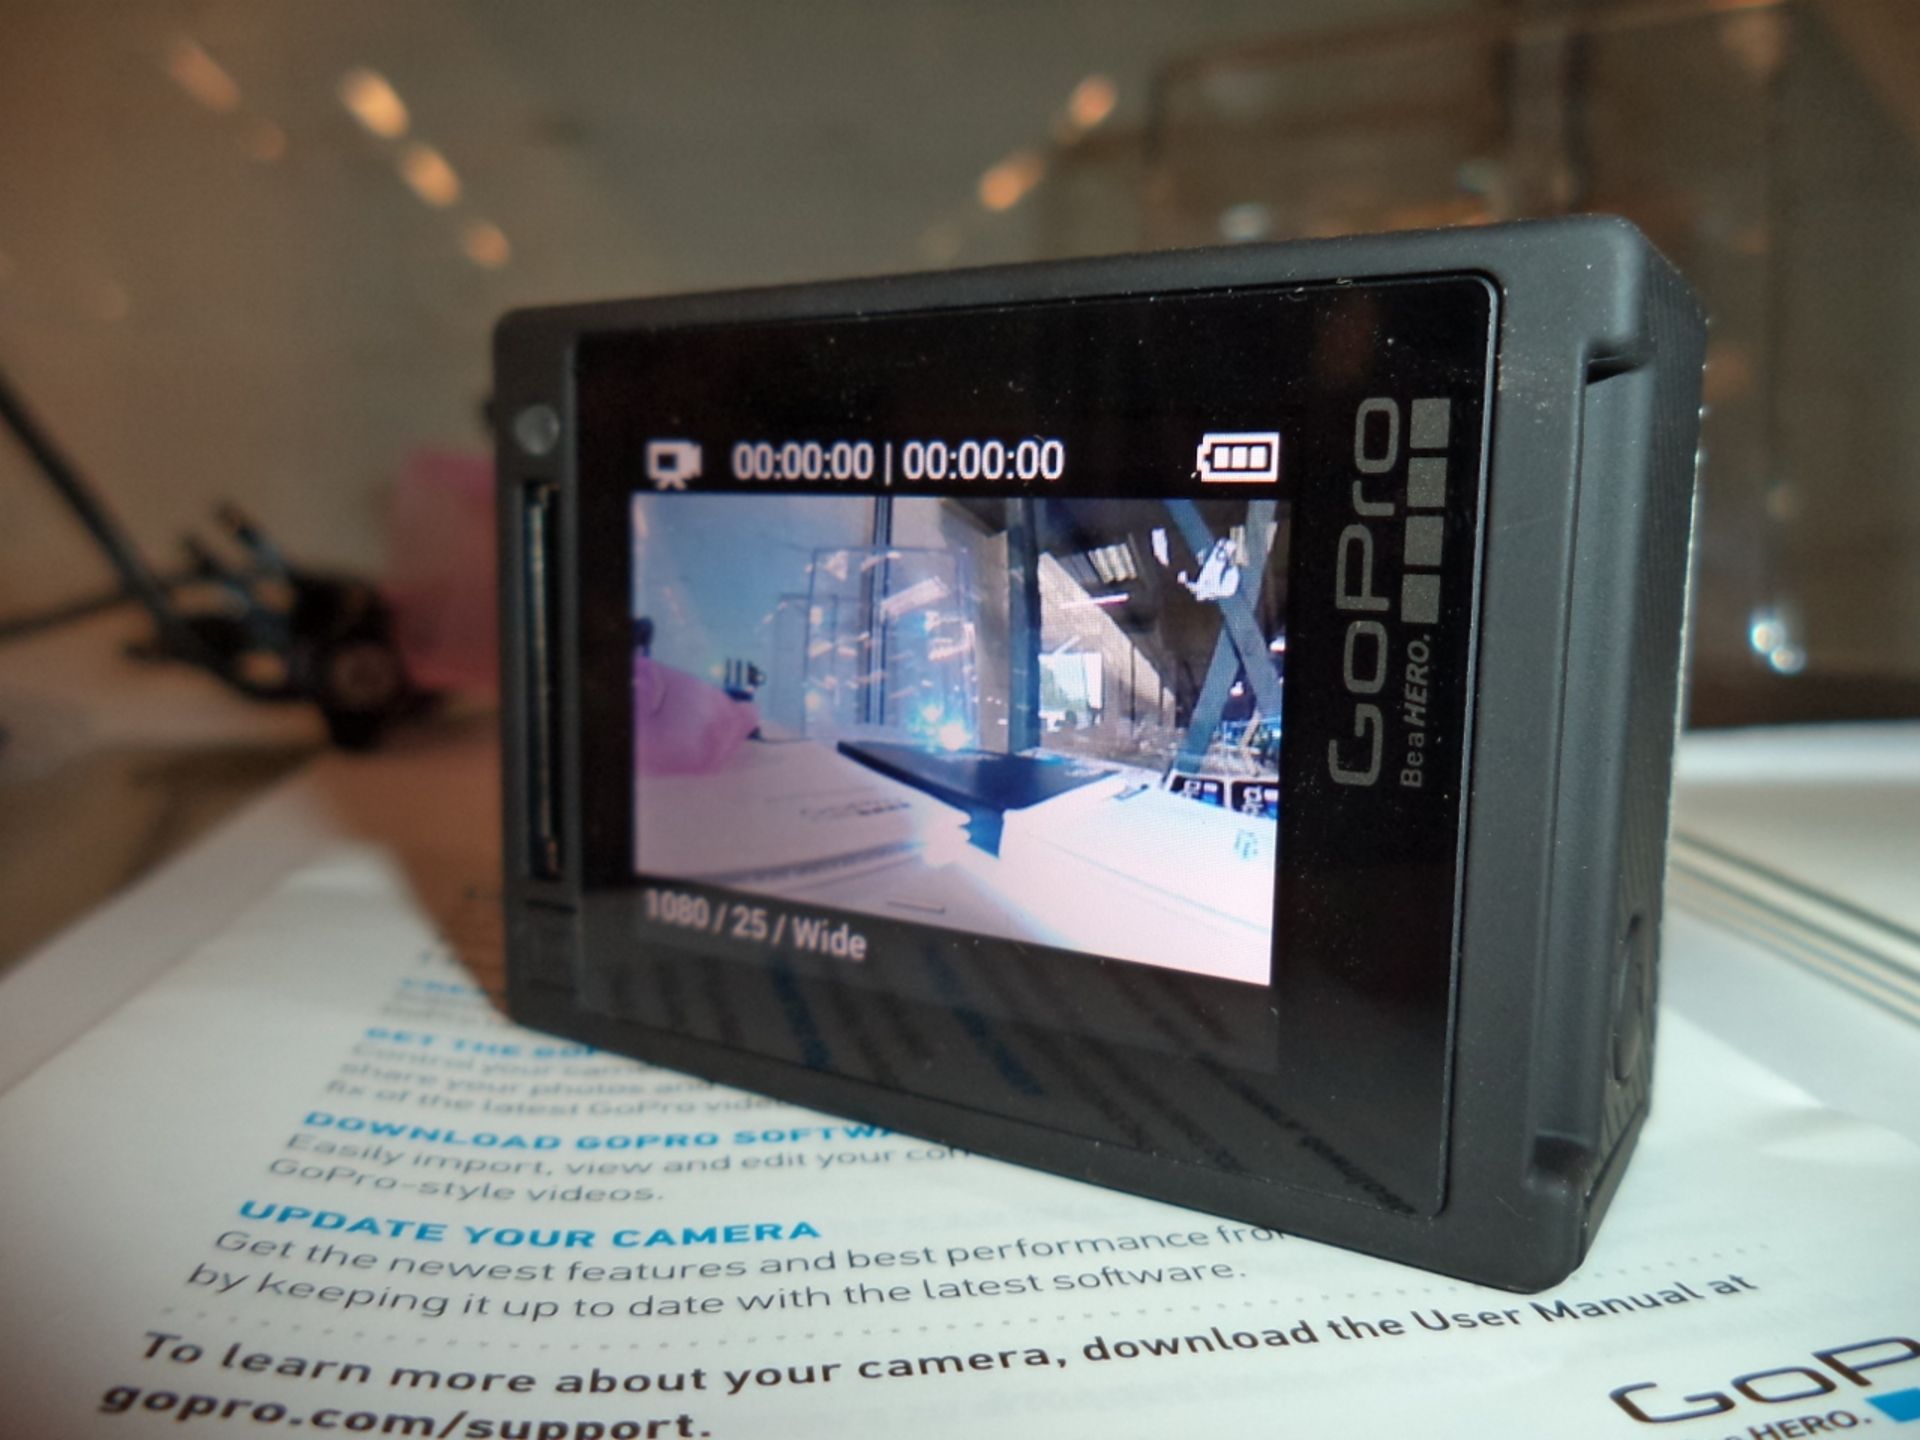 GoPro HERO4 Silver edition action video camera with built-in touchscreen display, box, manuals and - Image 5 of 11